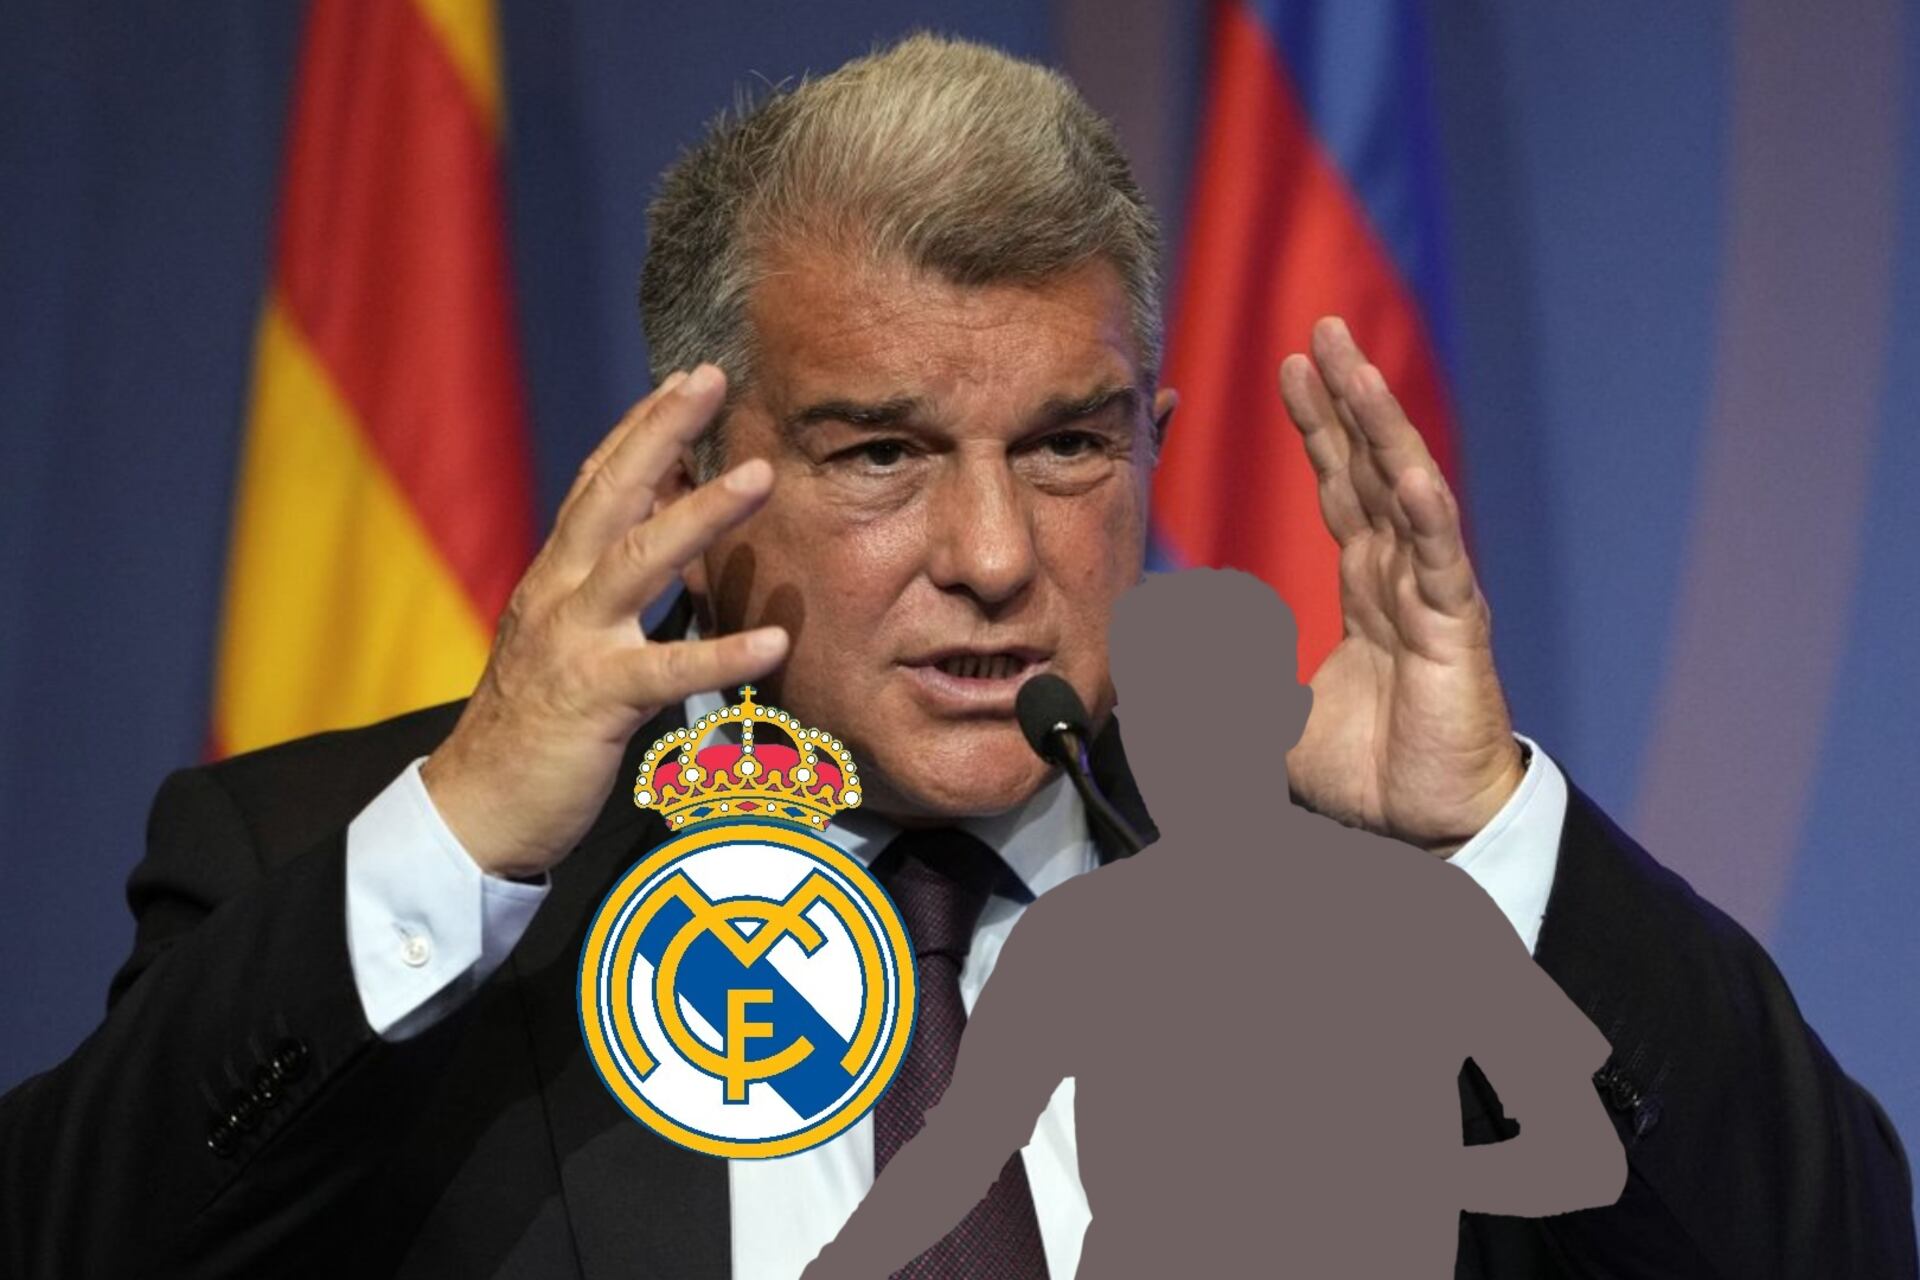 They want to take him away from Barcelona, the hidden signing of Real Madrid who has Laporta furious